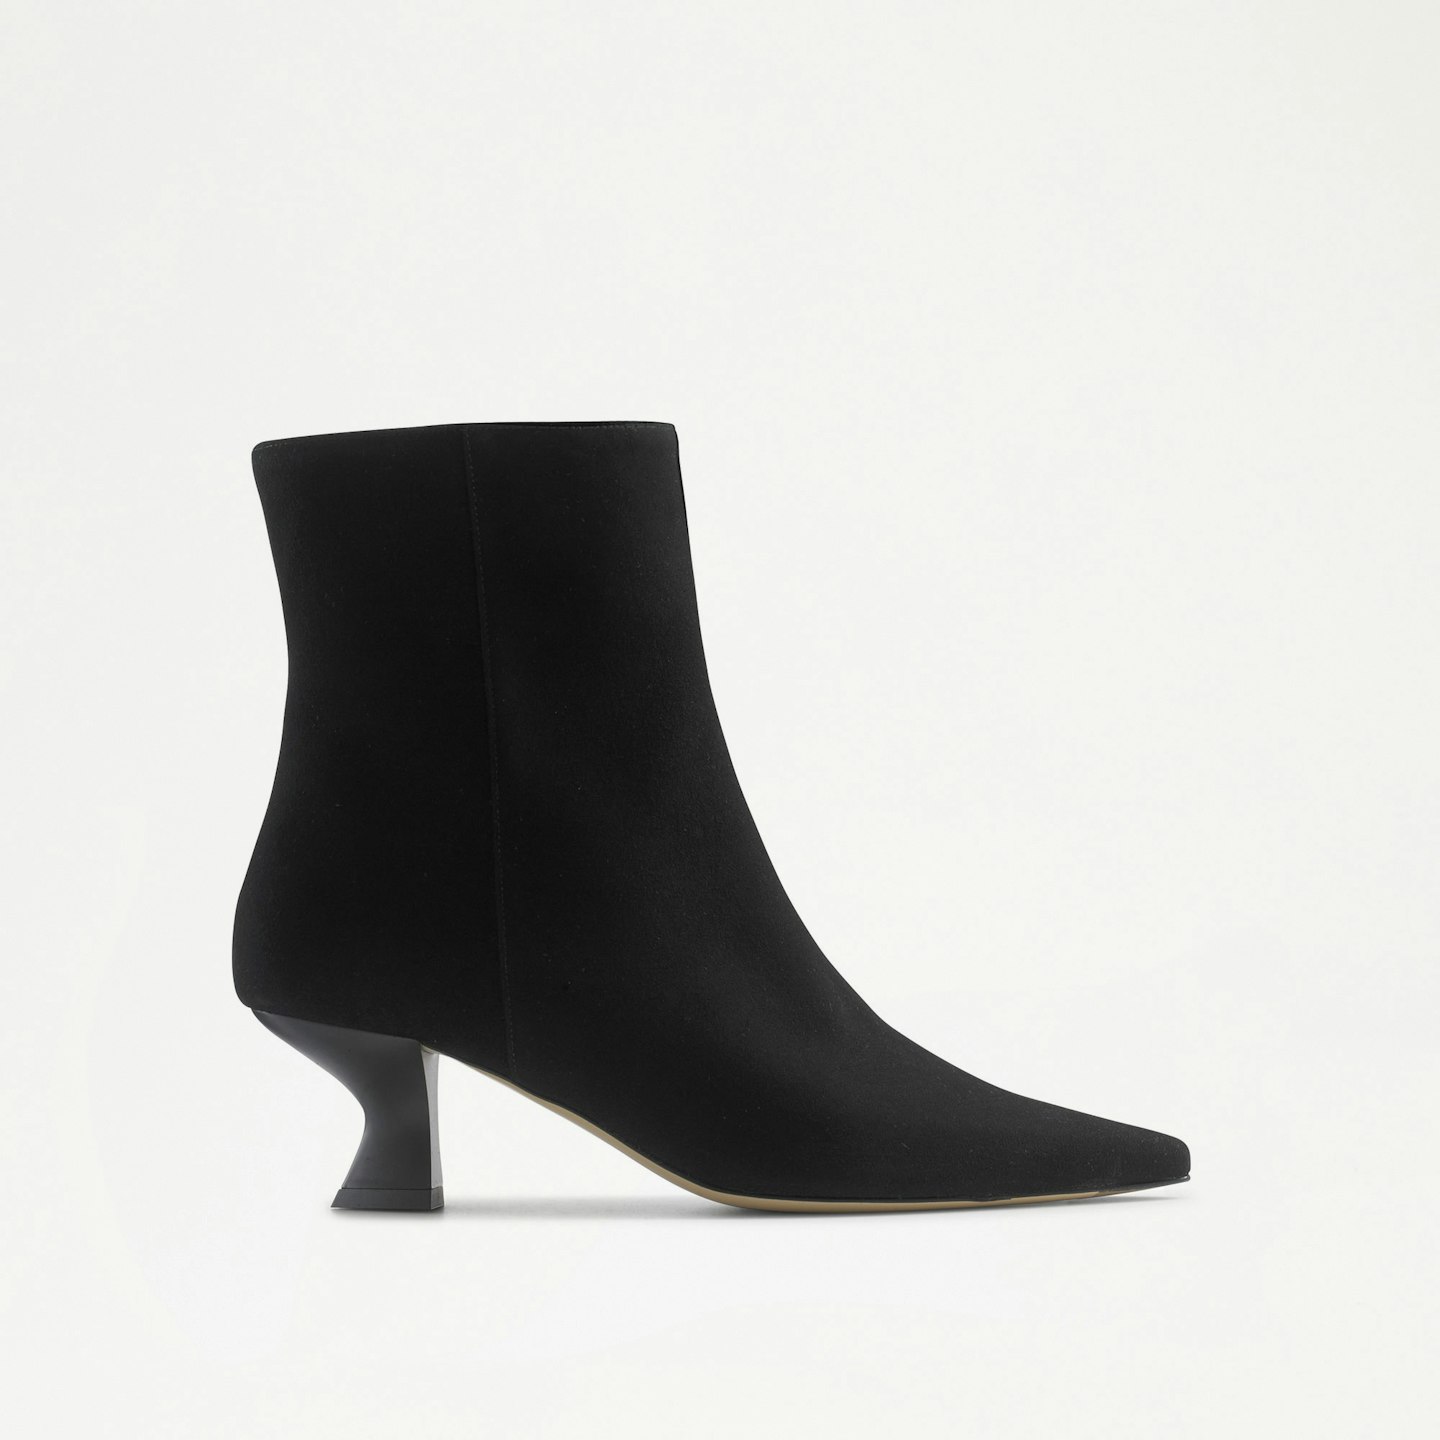 Russell & Bromley, Pointed Low Feature Heel Boot